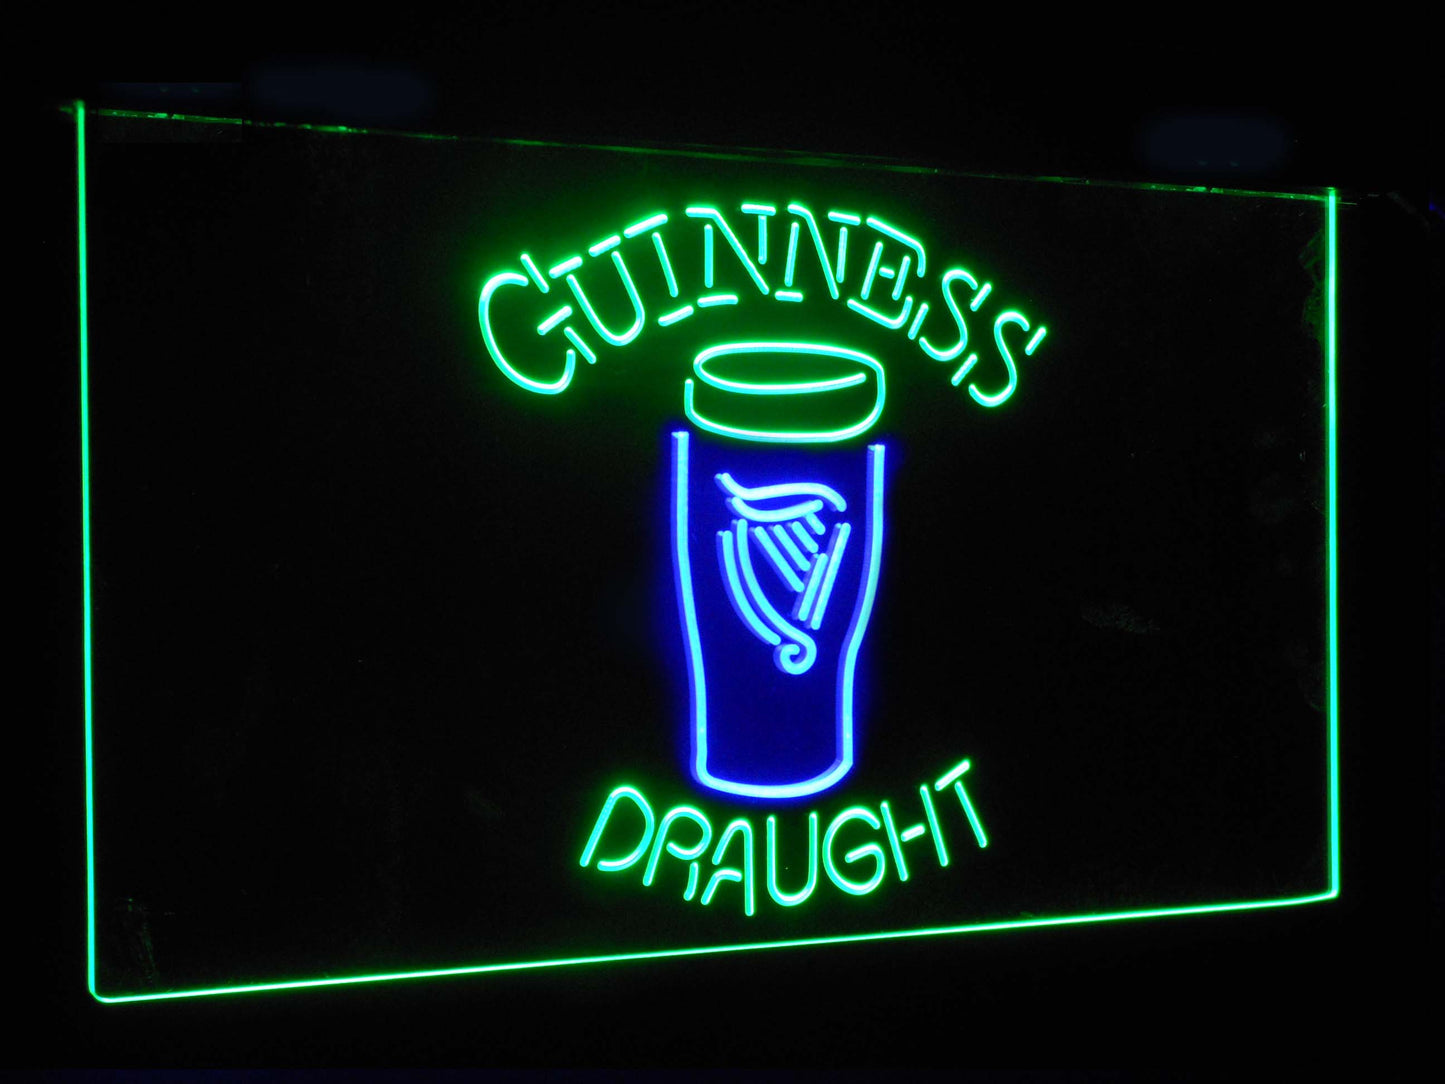 Guinness Draught Ale  Bar Decoration Gift Dual Color Led Neon Light Signs st6-a2044 by Woody Signs Co. - Handmade Crafted Unique Wooden Creative